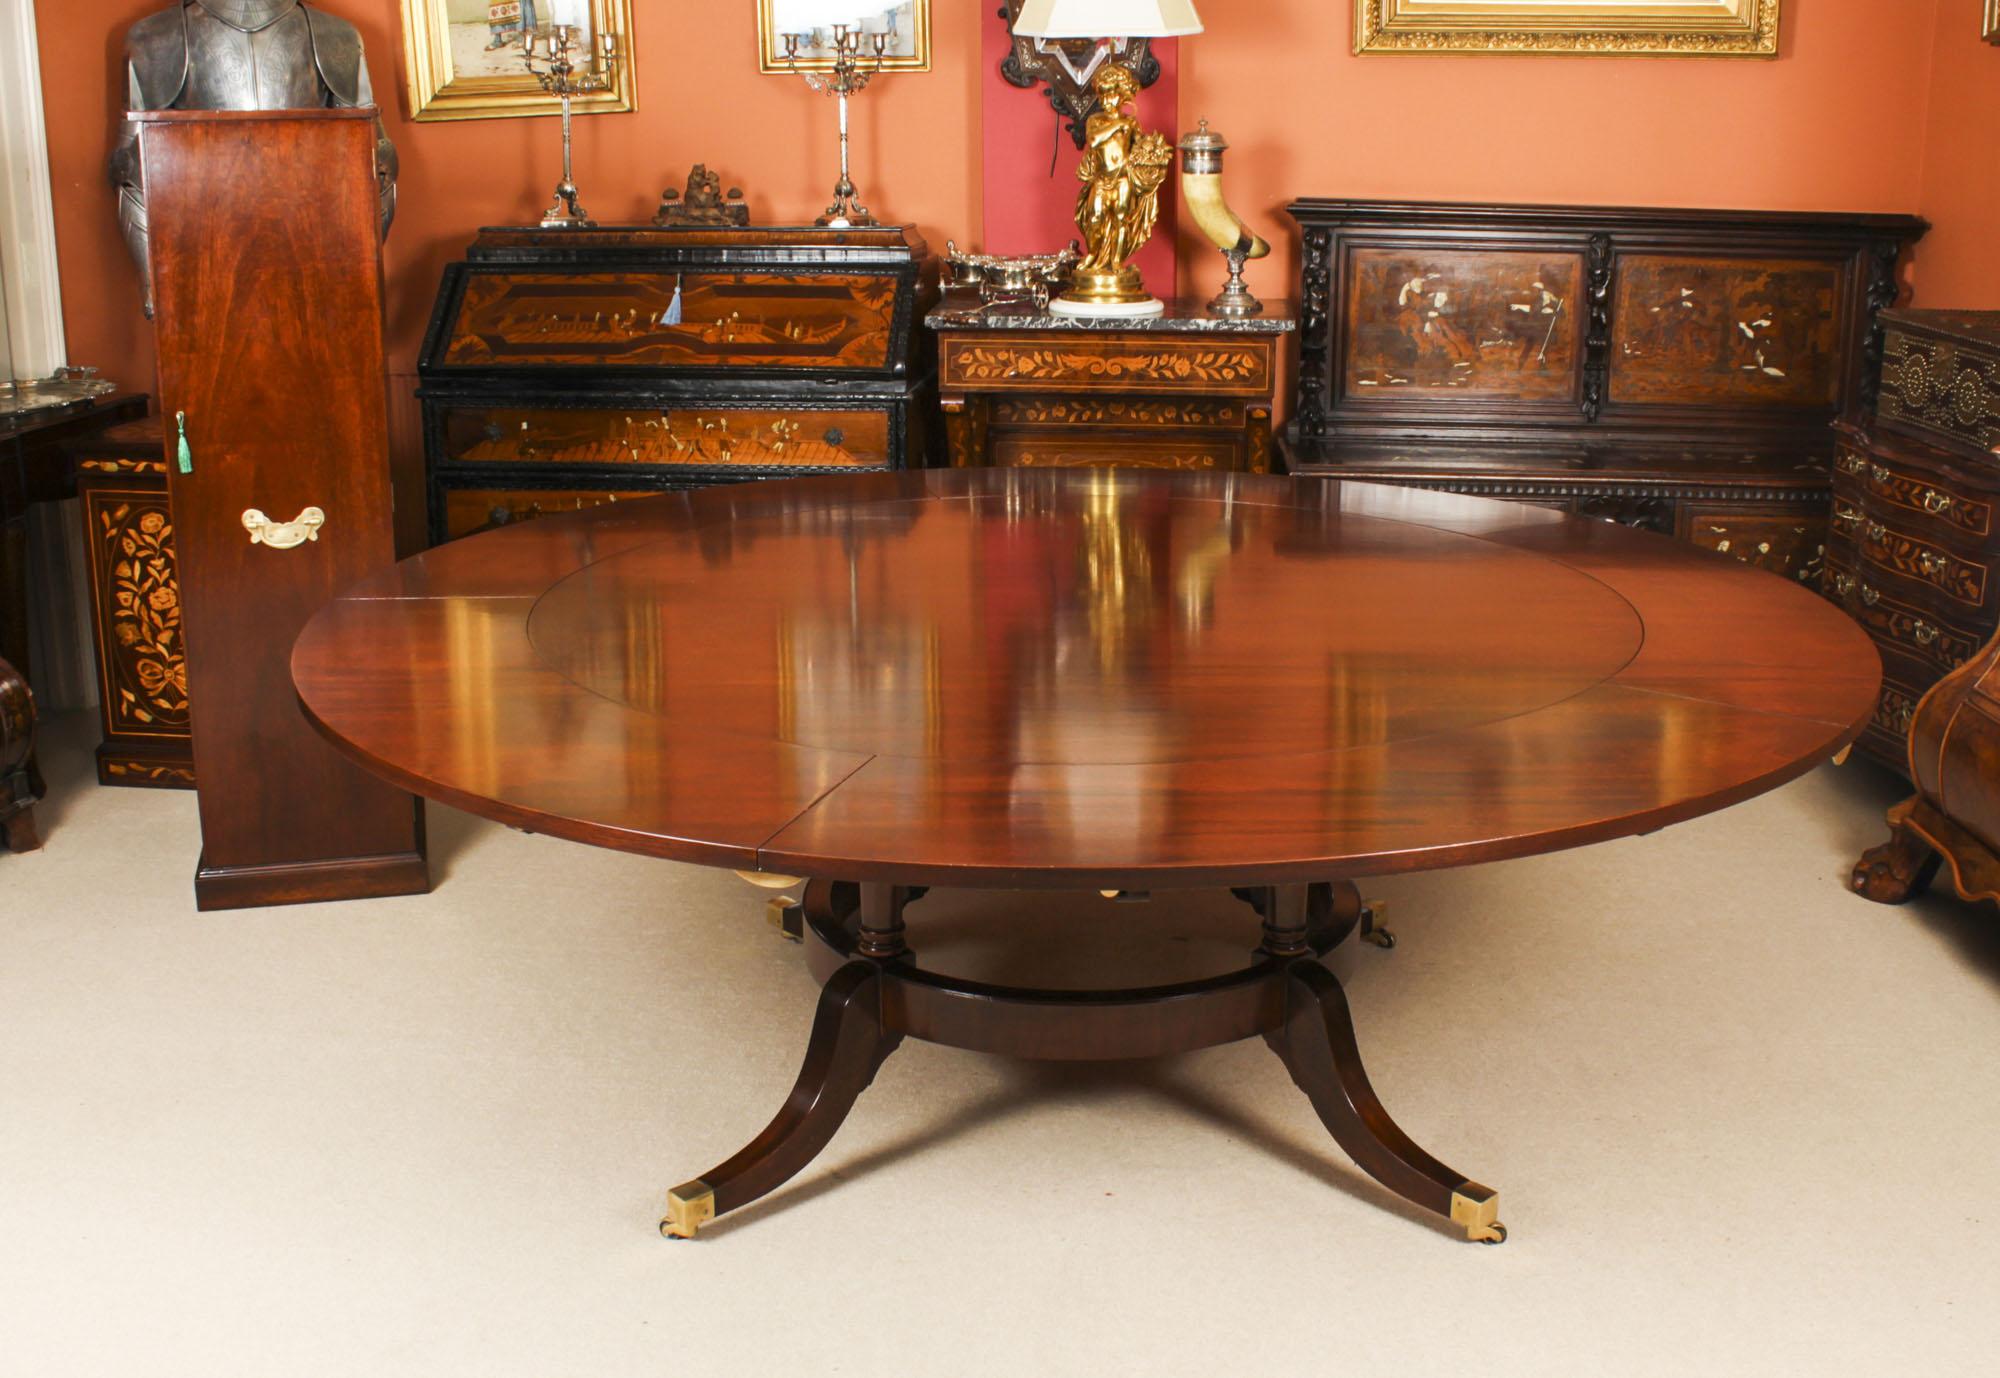 This is a beautiful Regency Revival dining set comprising a Jupe style dining table and leaf holder by Arthur Brett, and a set of ten balloon back dining chairs, mid 20th Century in date.

The table has a solid mahogany top with five peripheral